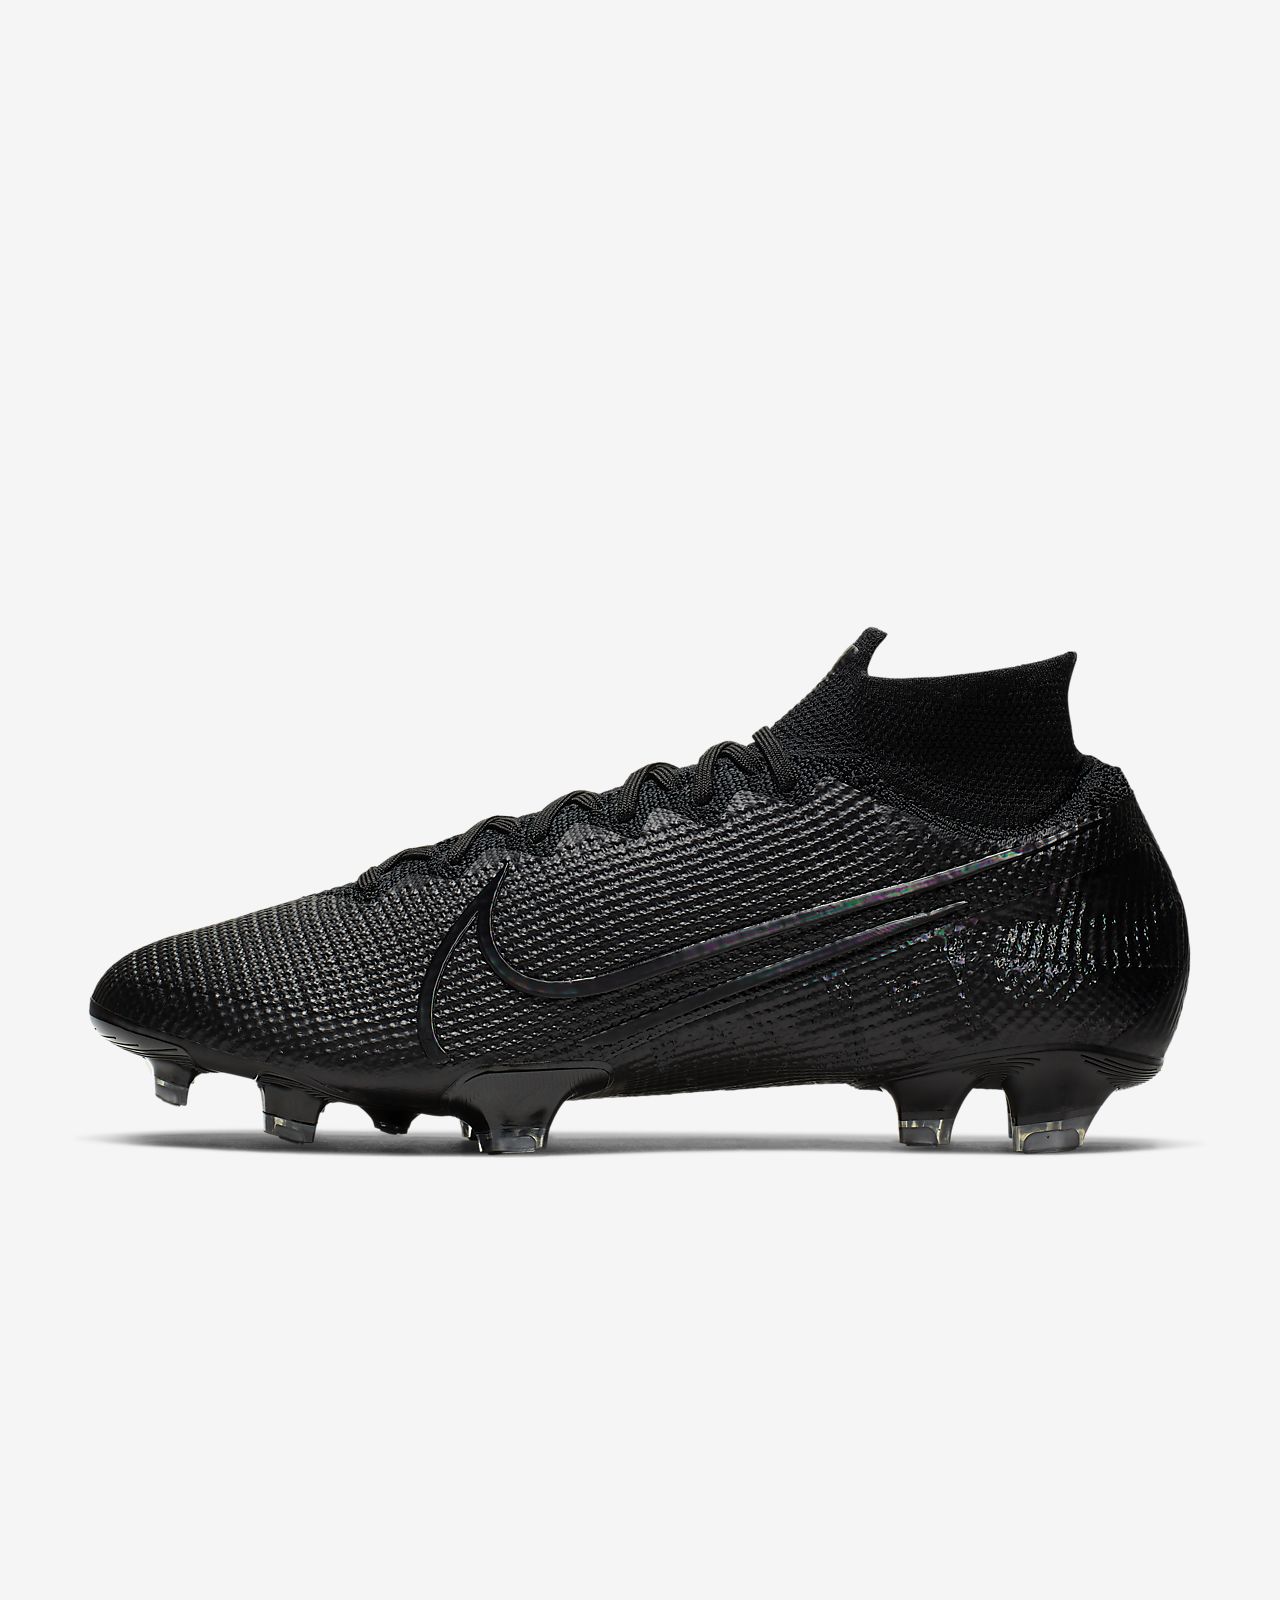 Nike Mercurial Superfly 7 Elite FG + SG All Conditions Pack.